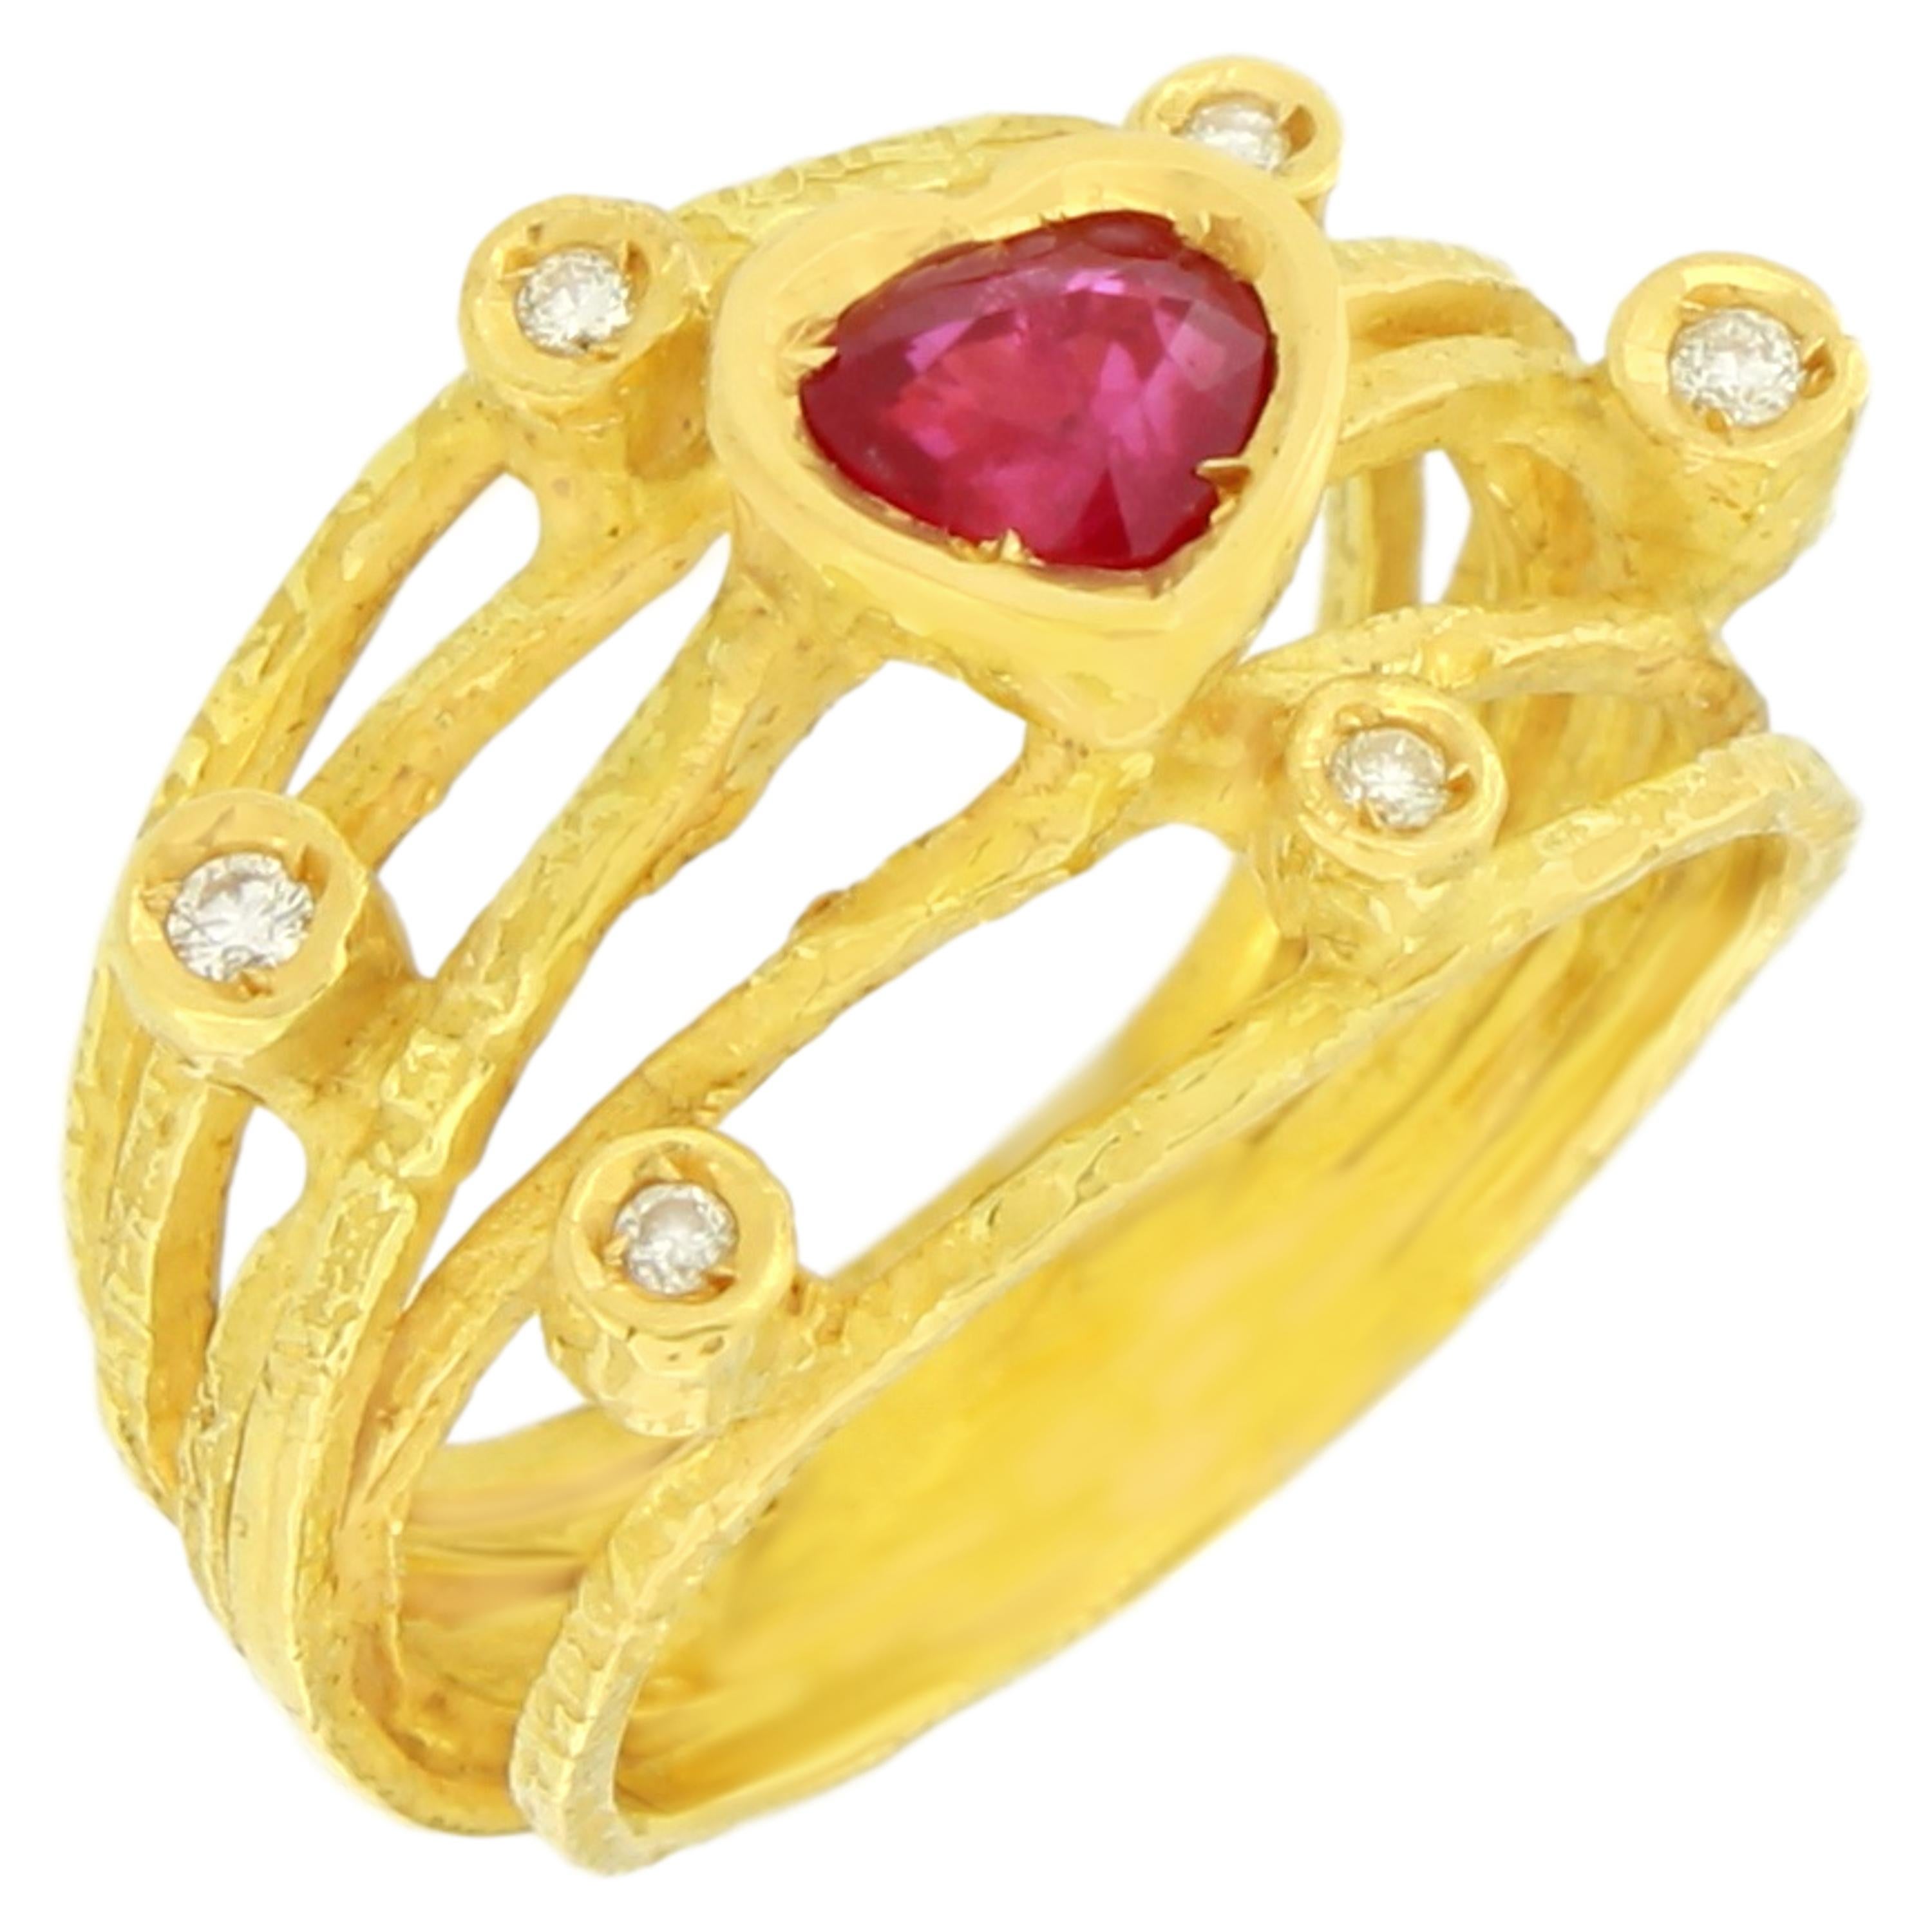 Lovely Heart Ruby and Diamonds 18 Karat Yellow Gold Cocktail Ring, from Sacchi’s 